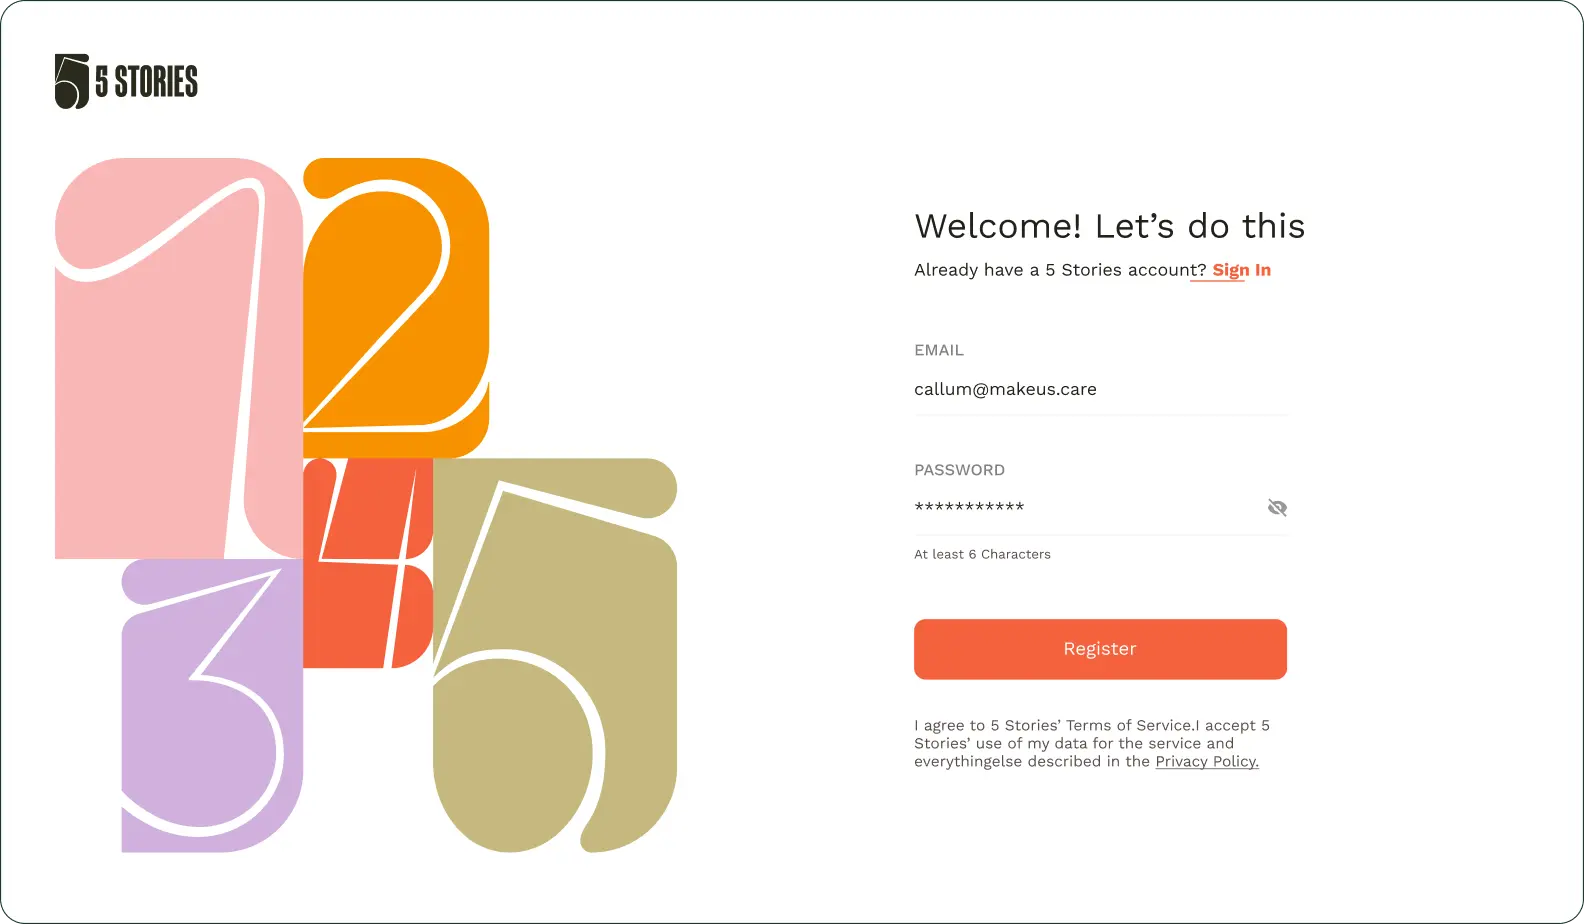 Login page to 5 stories platform. Illustration of huge colorful numbers and a login form with an orange button